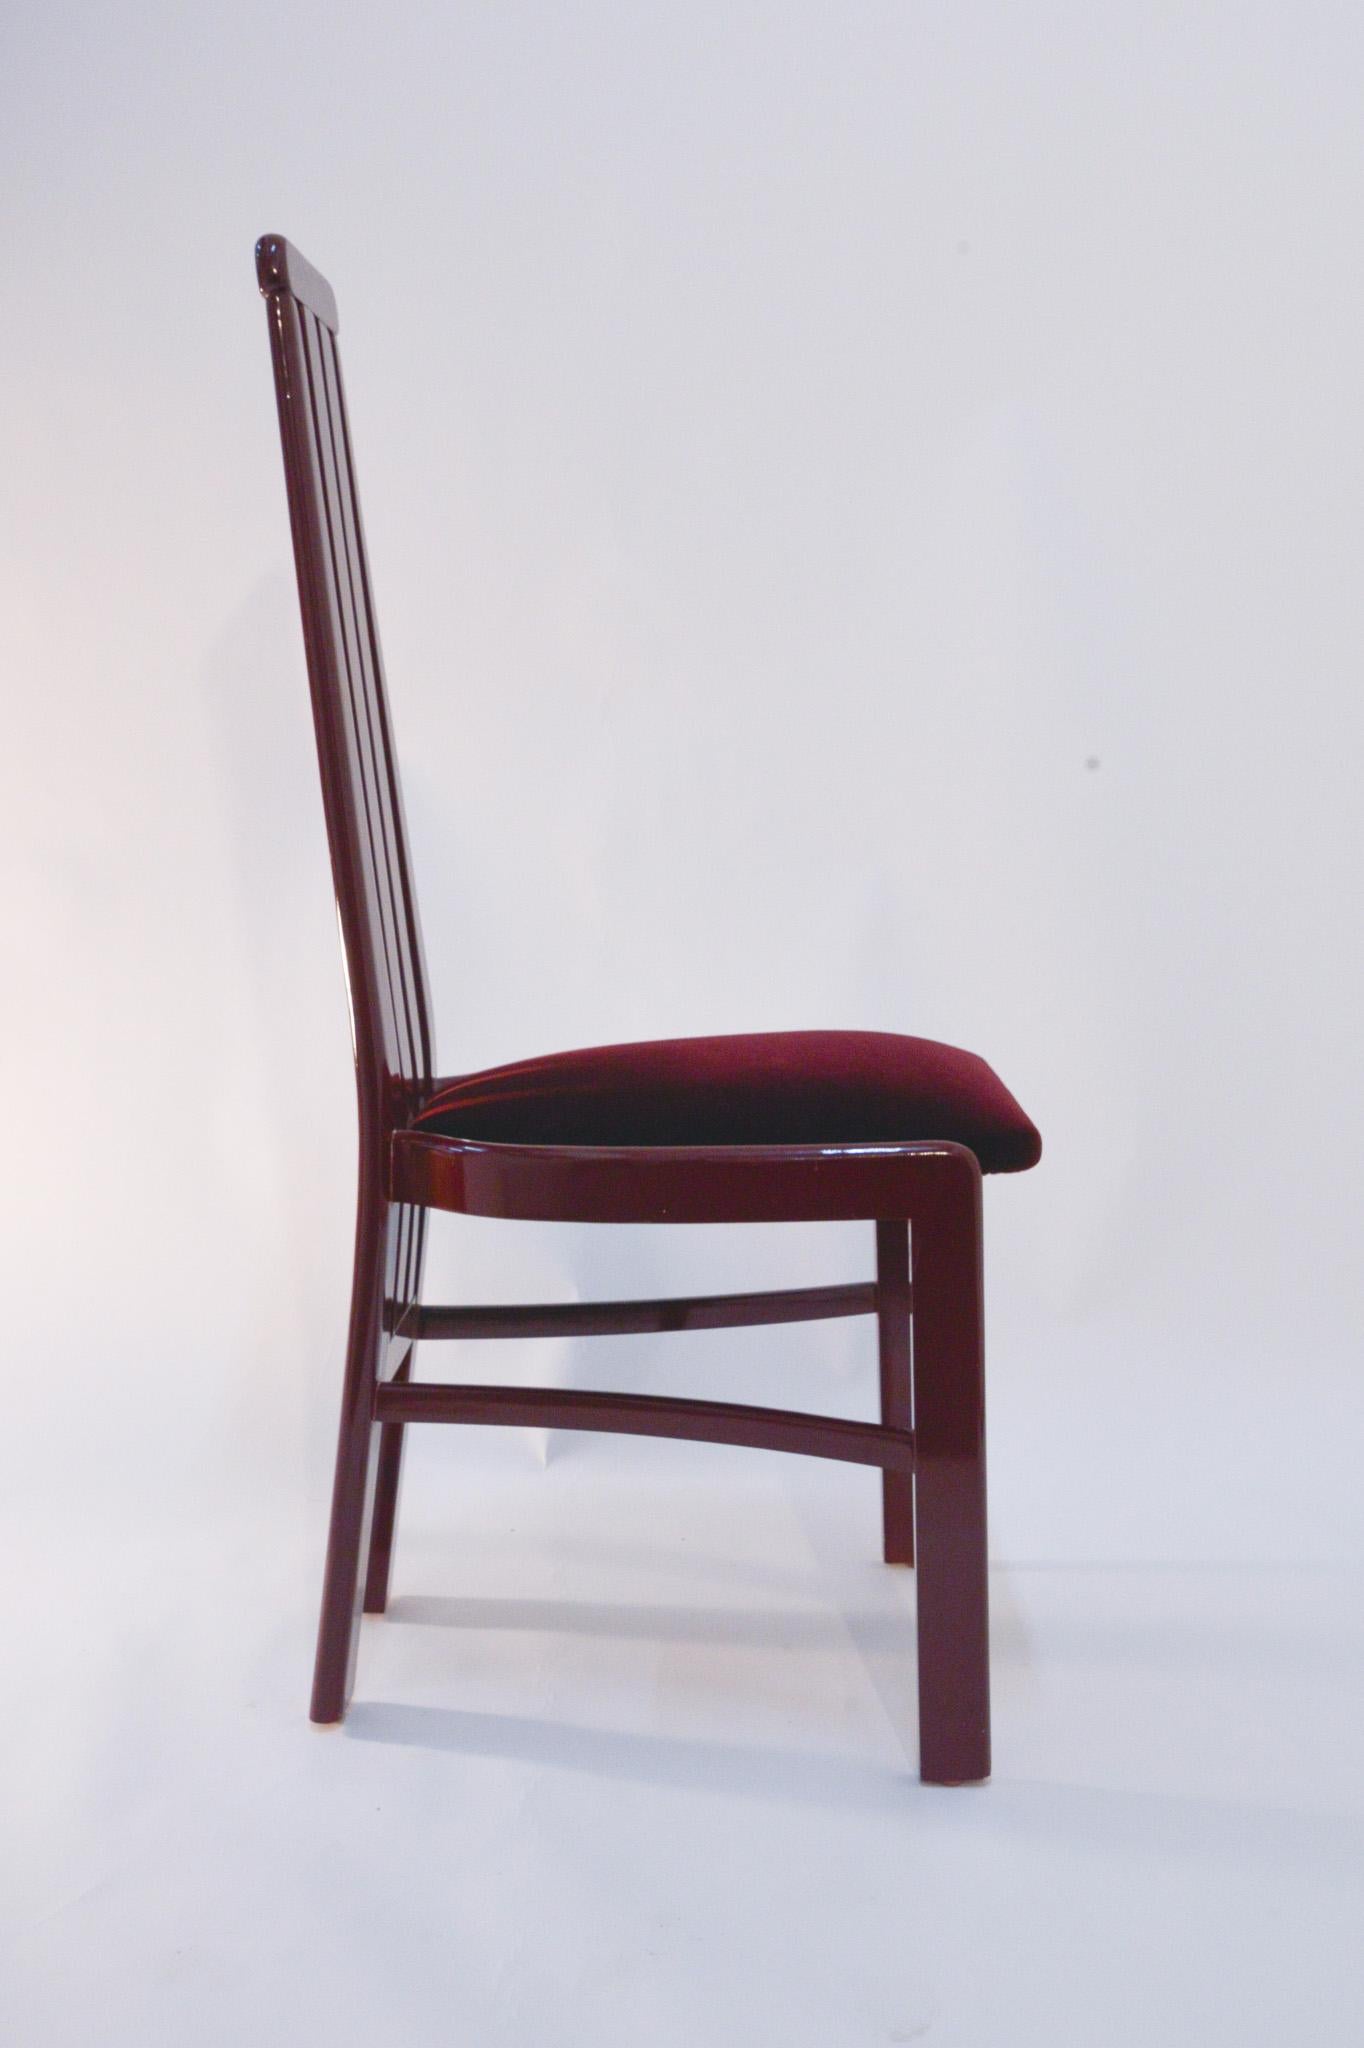 paco capdell chairs